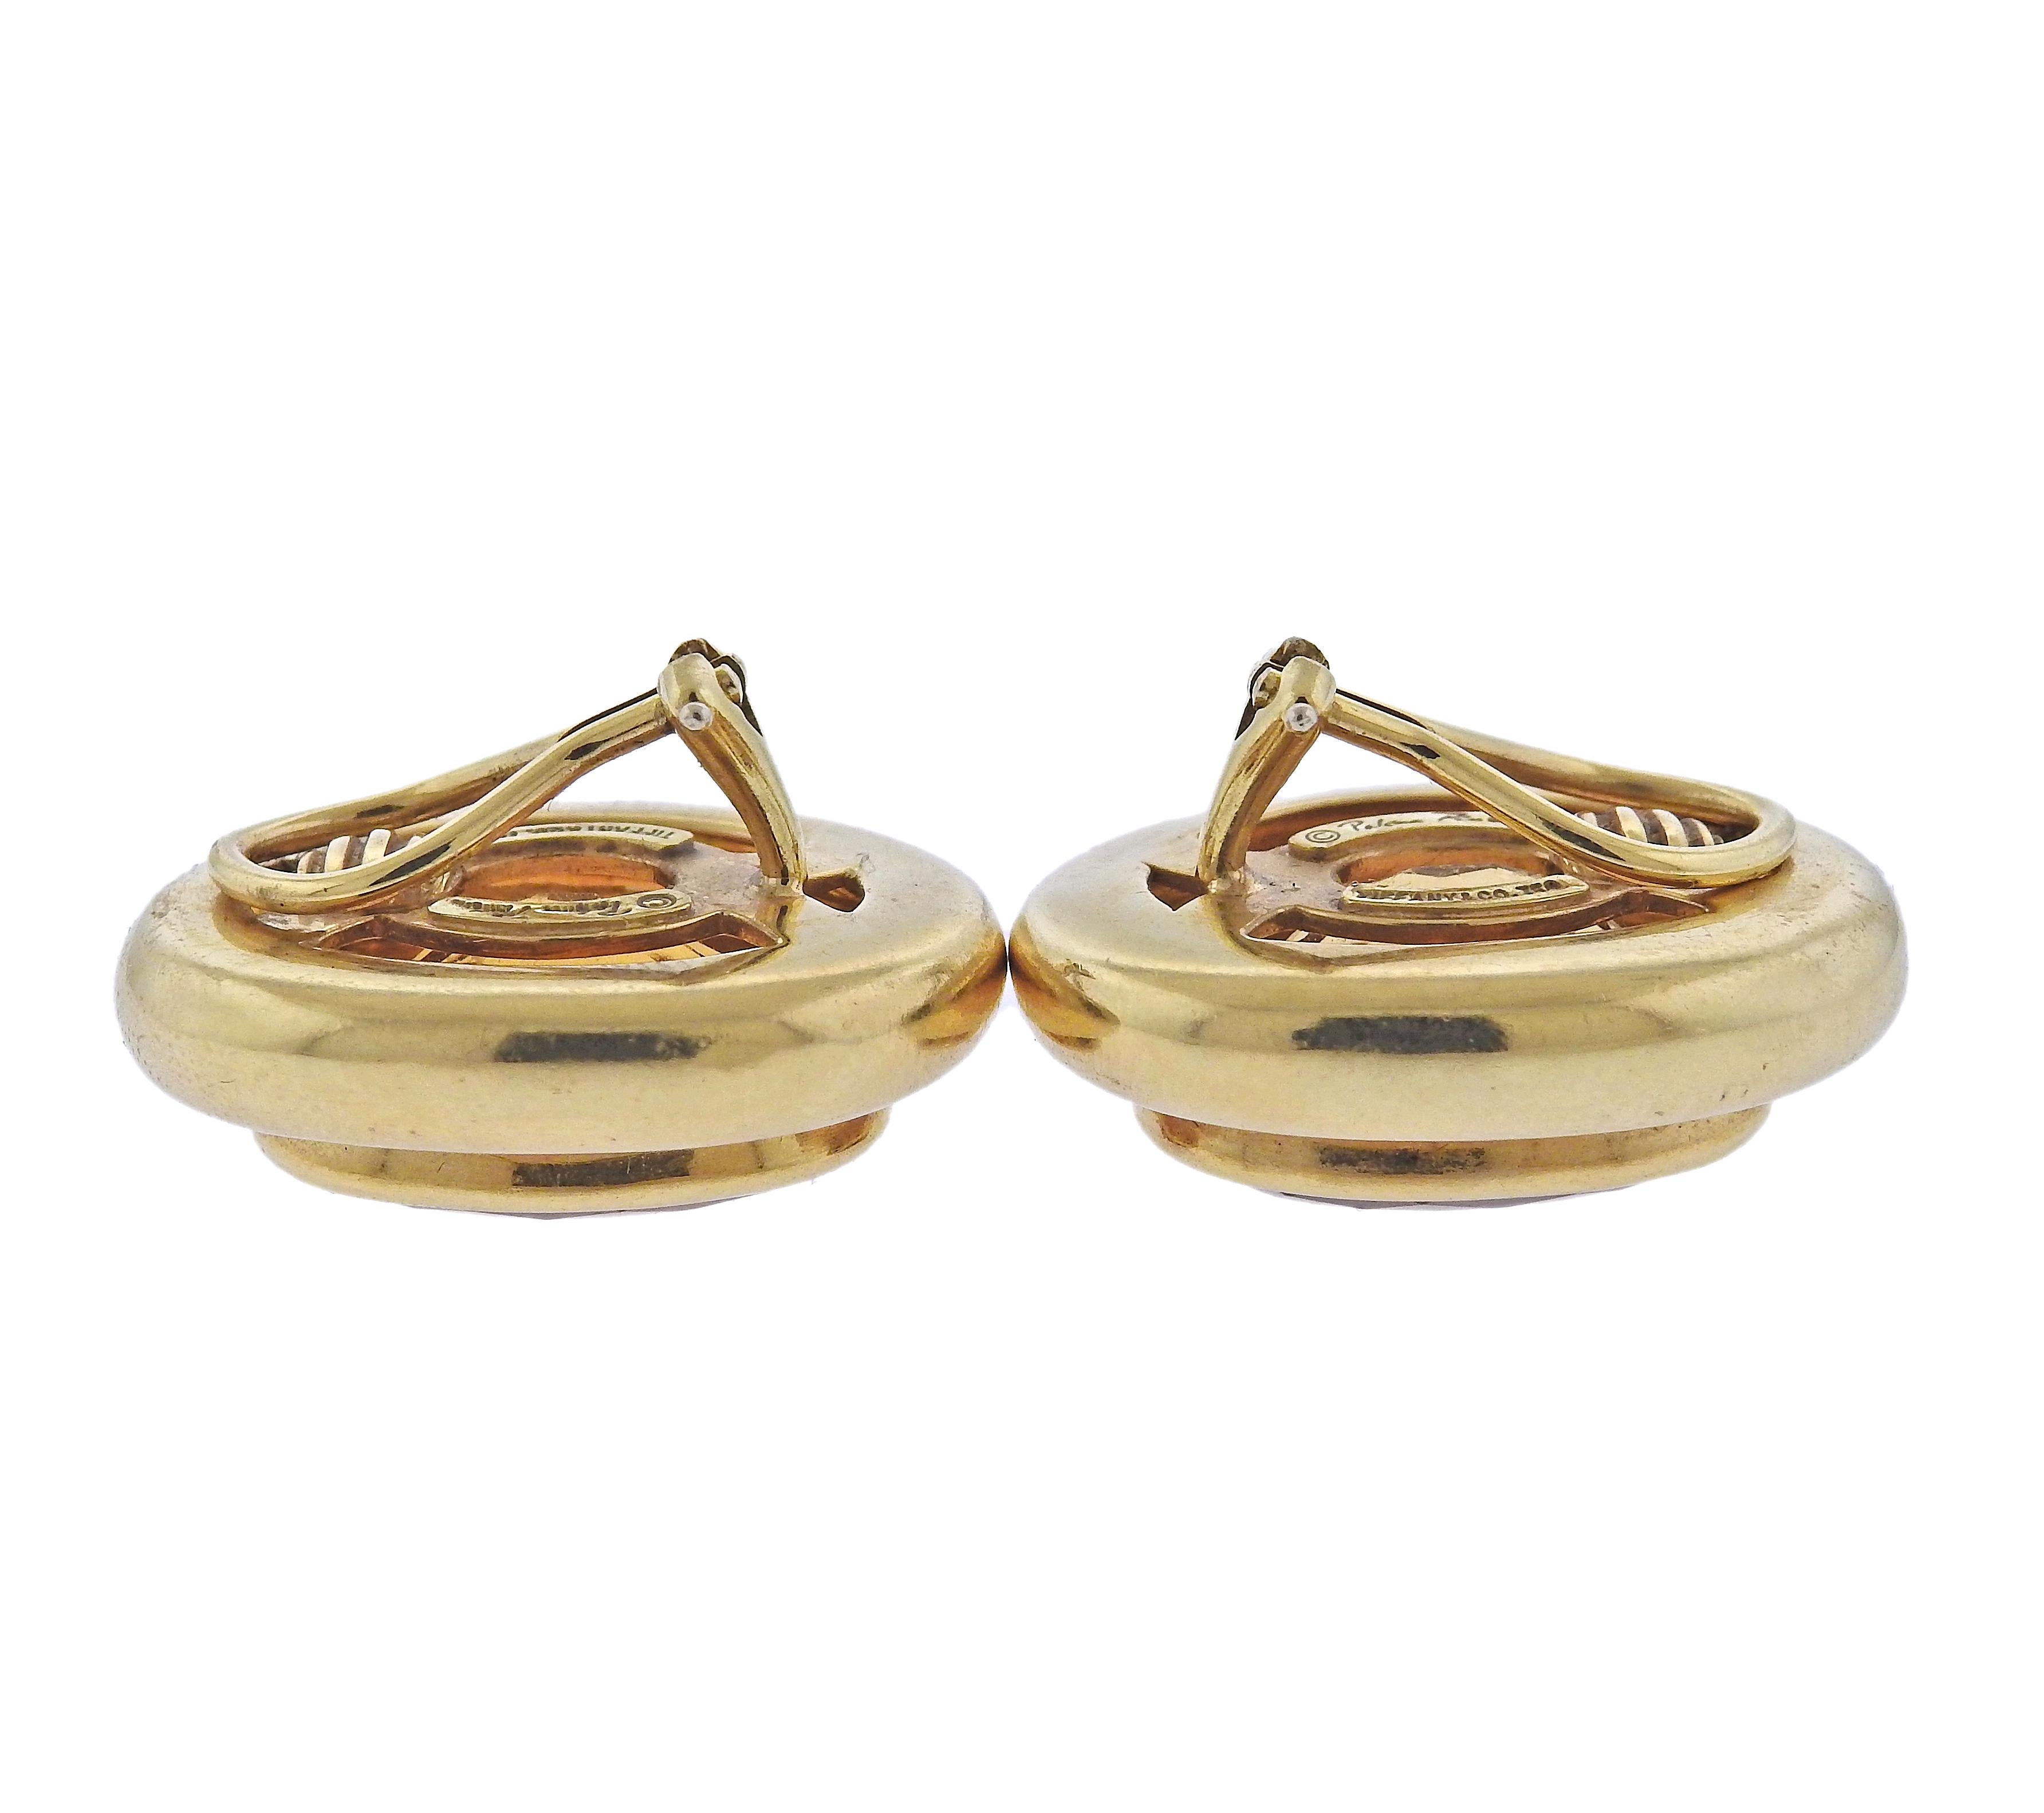 18k yellow gold pair of Tiffany & Co earrings by Paloma Picasso, with citrines.  Earrings are 26mm x 21mm. Marked: Tiffany & Co, Paloma Picasso, 750. Weight - 27.9 grams. 